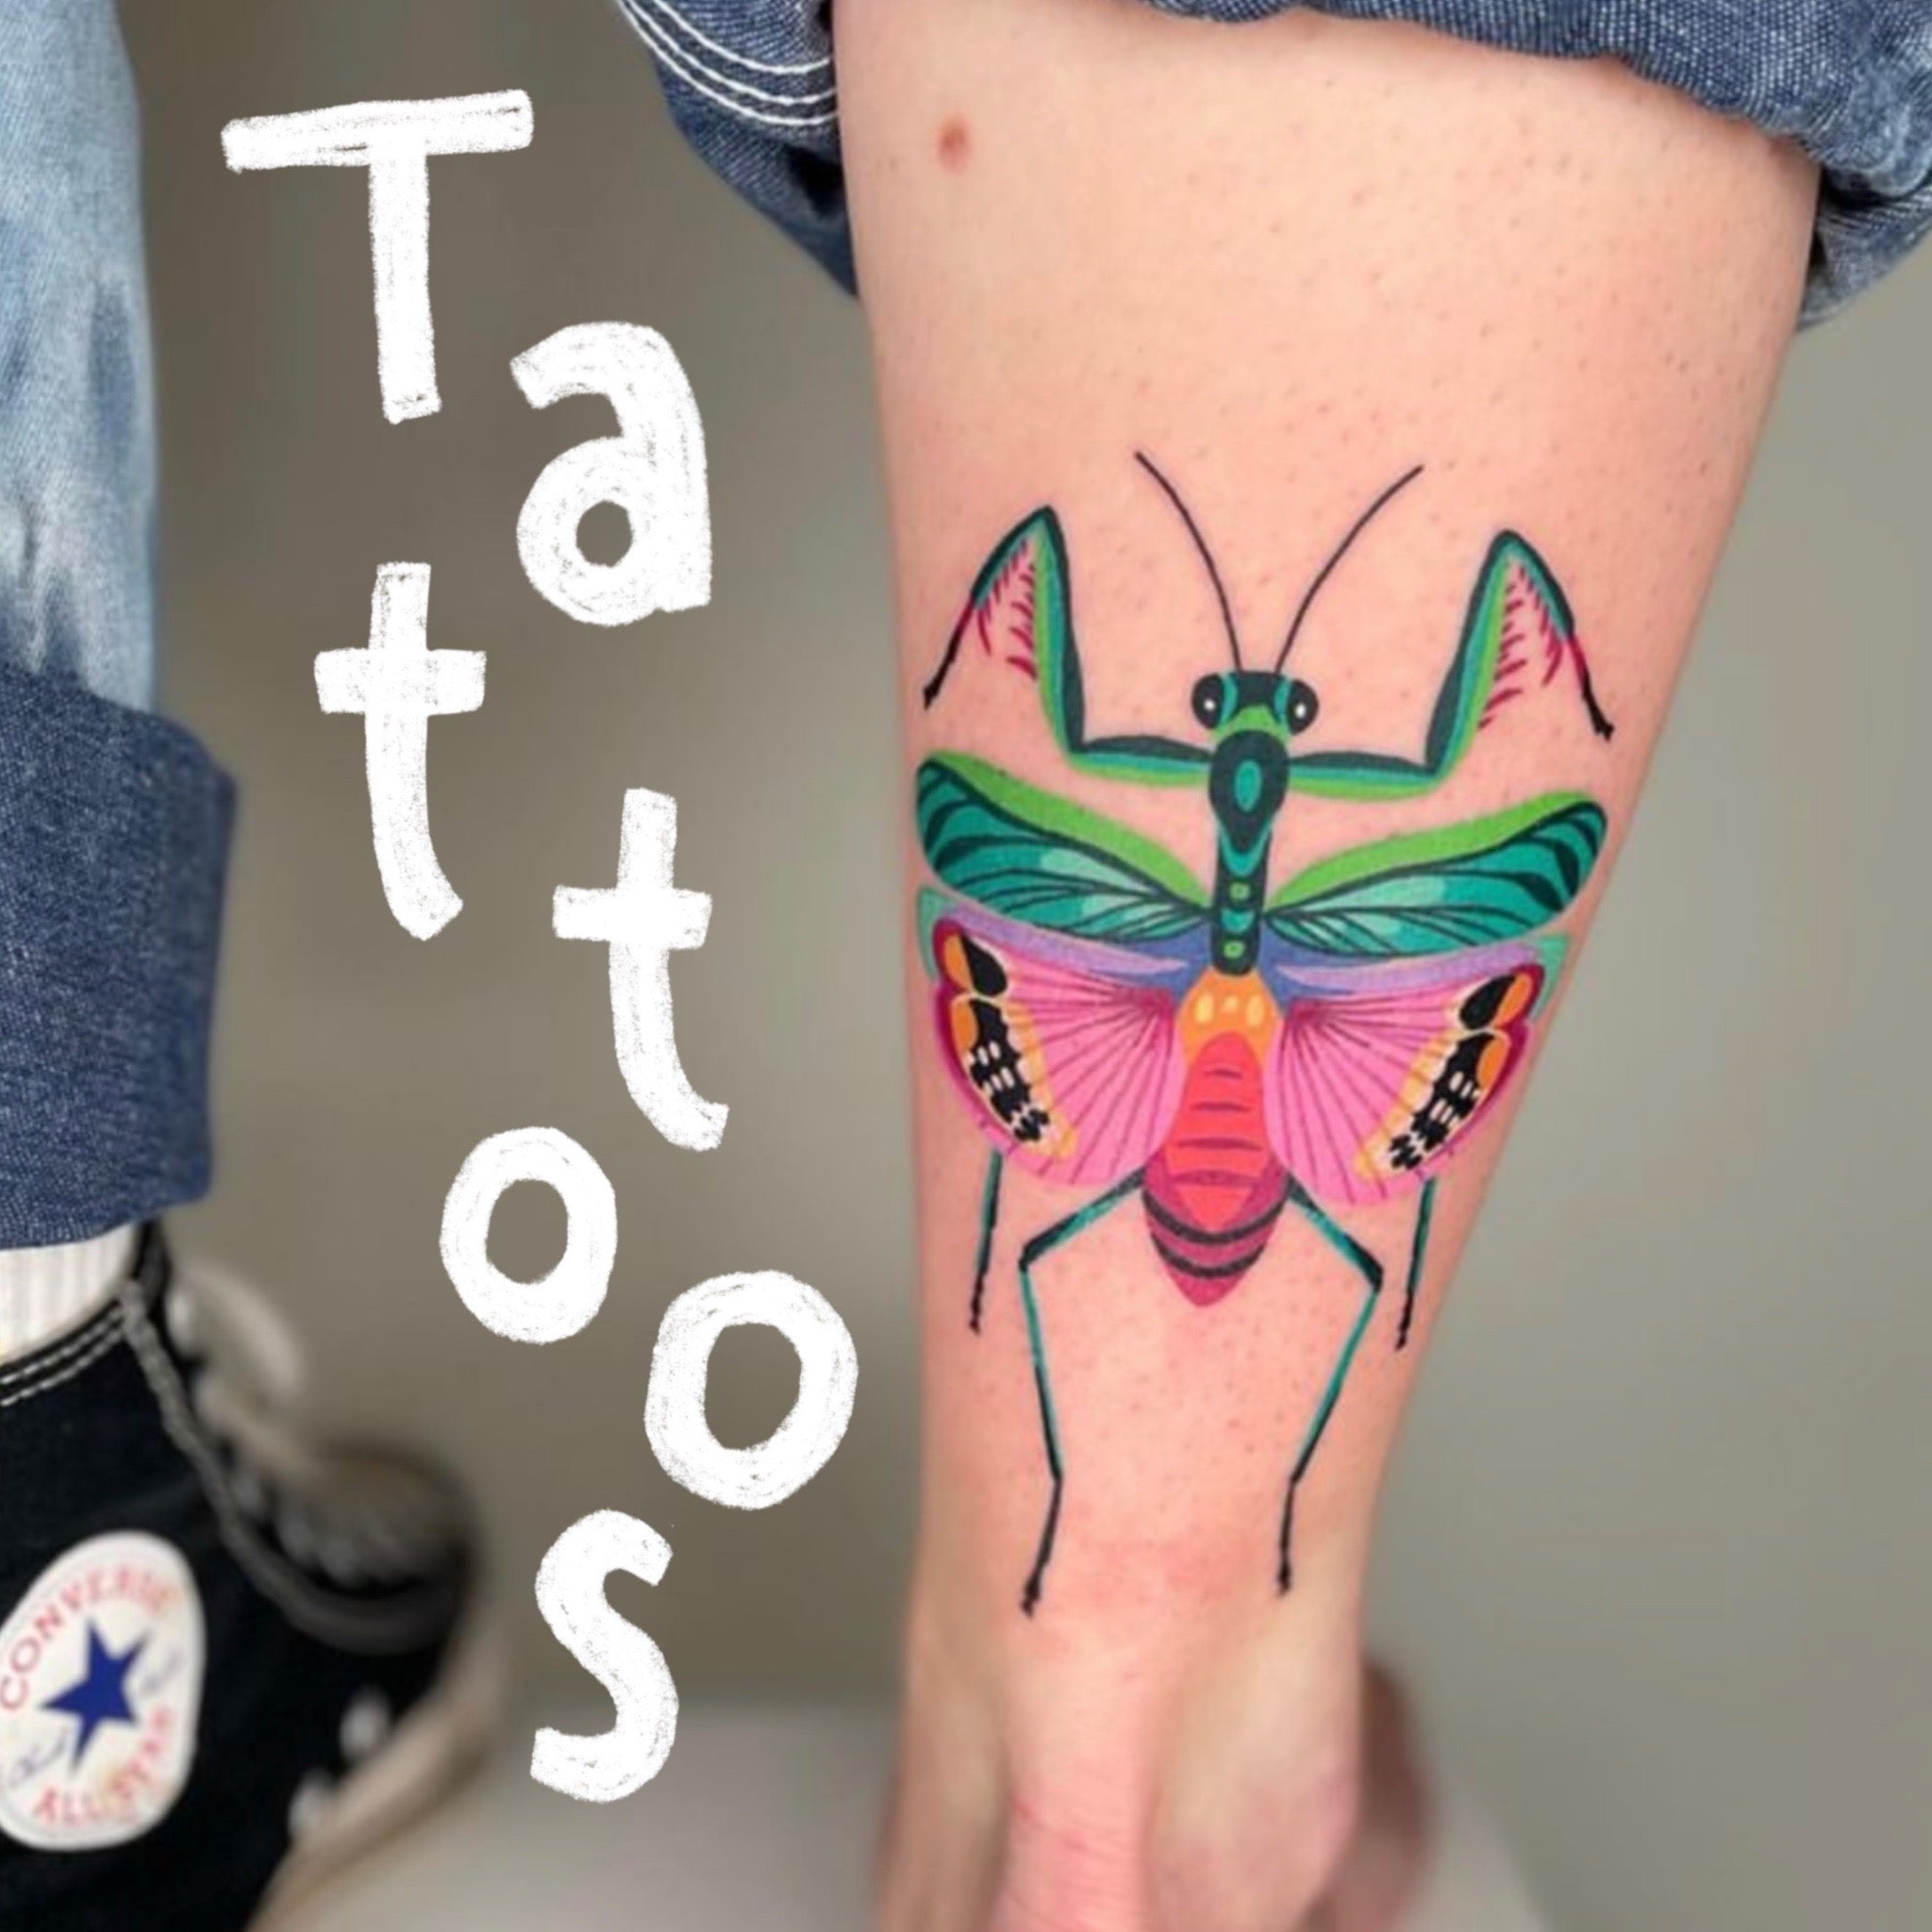 Ankle tattoo of a colorful praying mantis by Lauren Blair